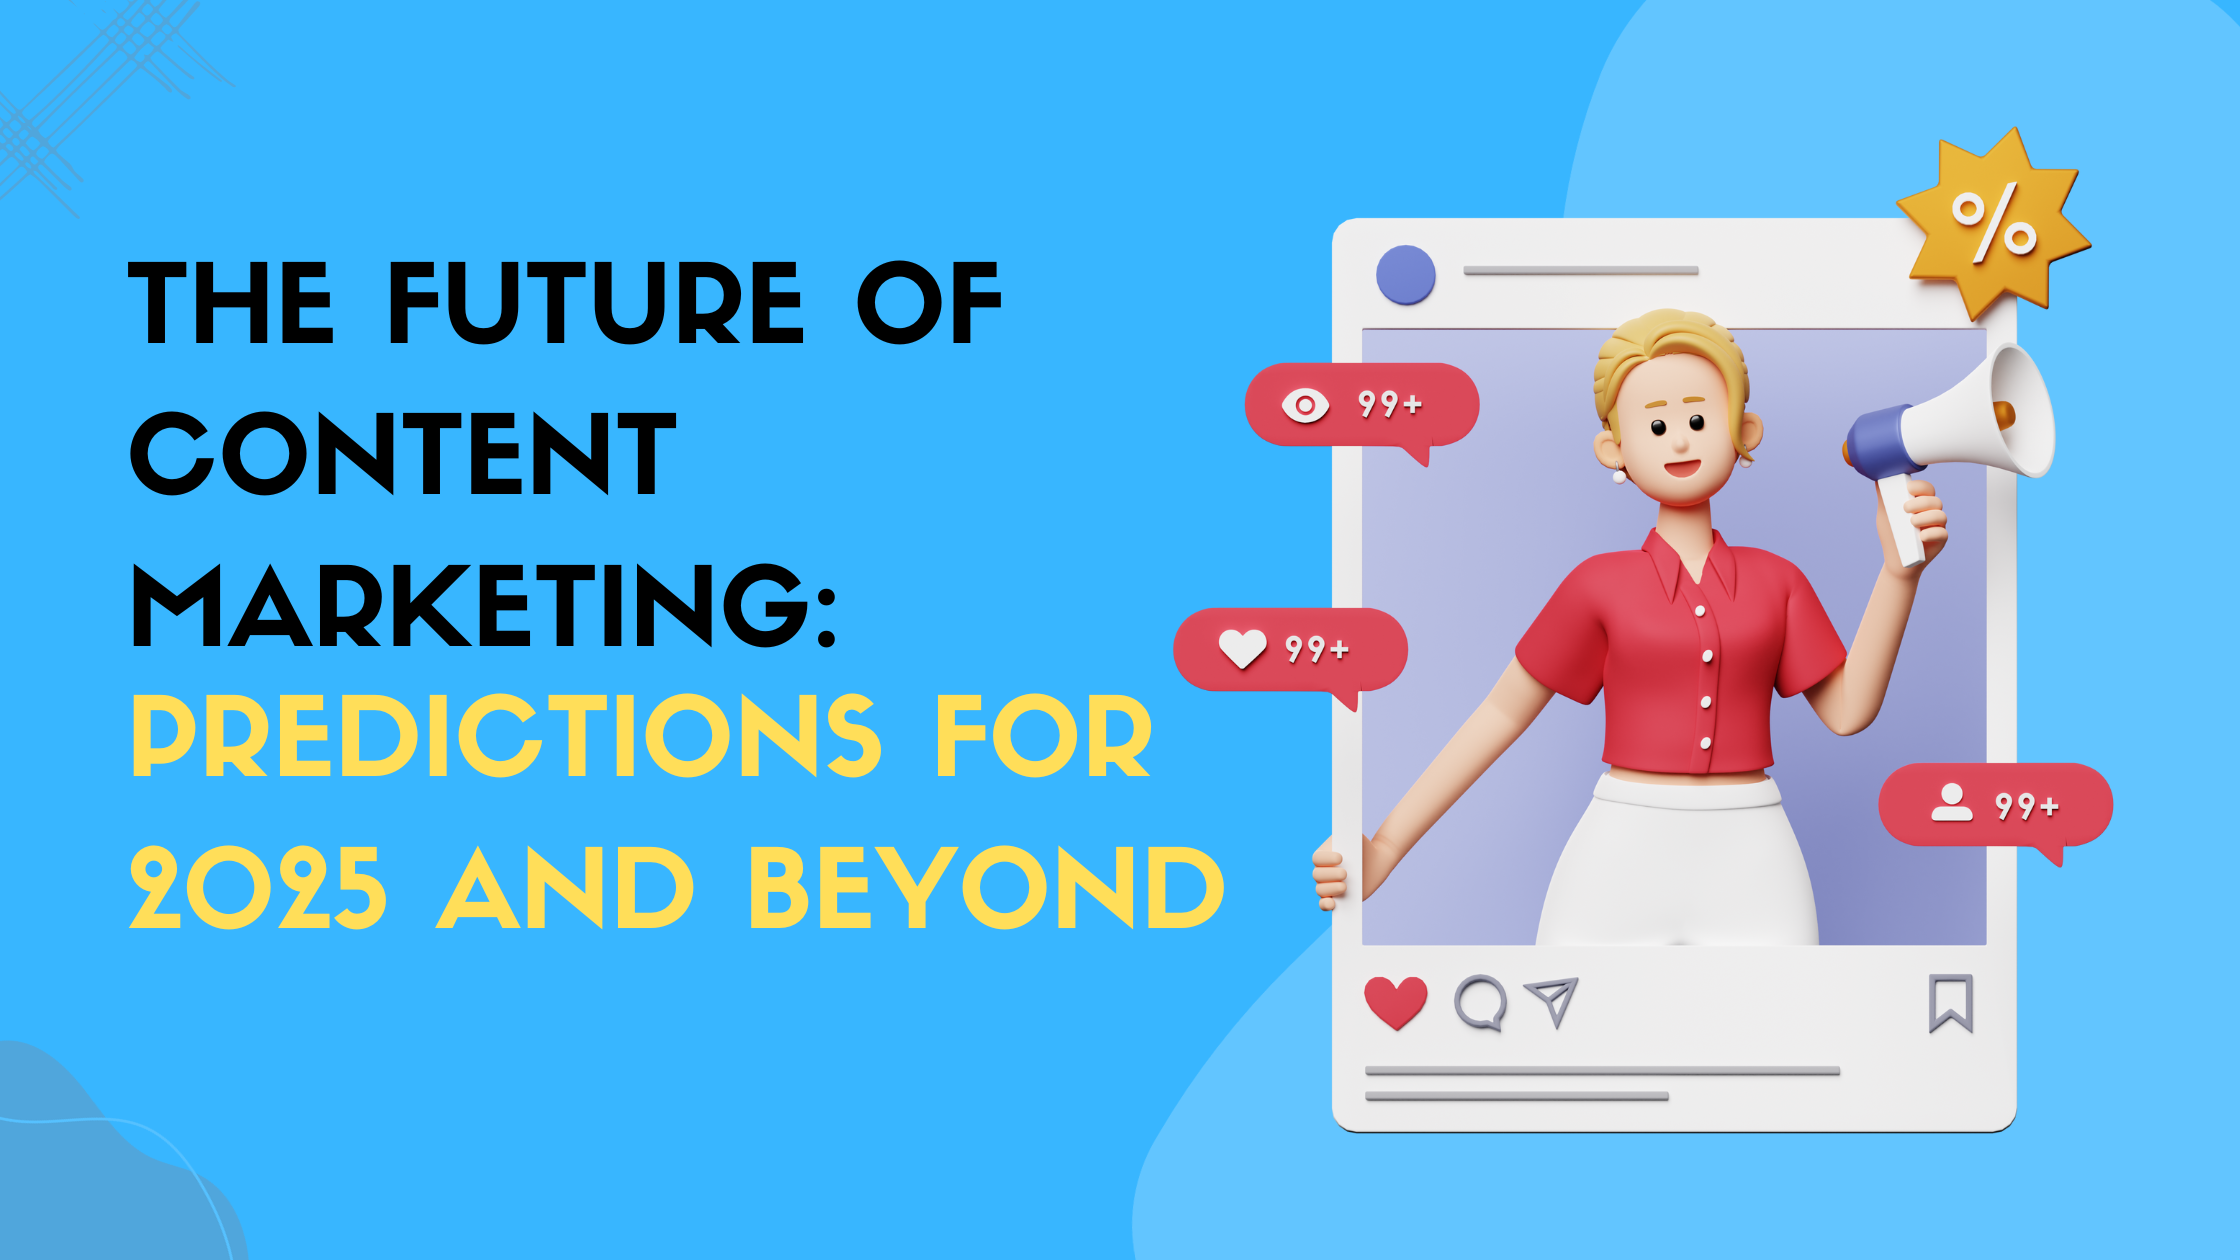 The Future of Content Marketing Predictions for 2025 and Beyond